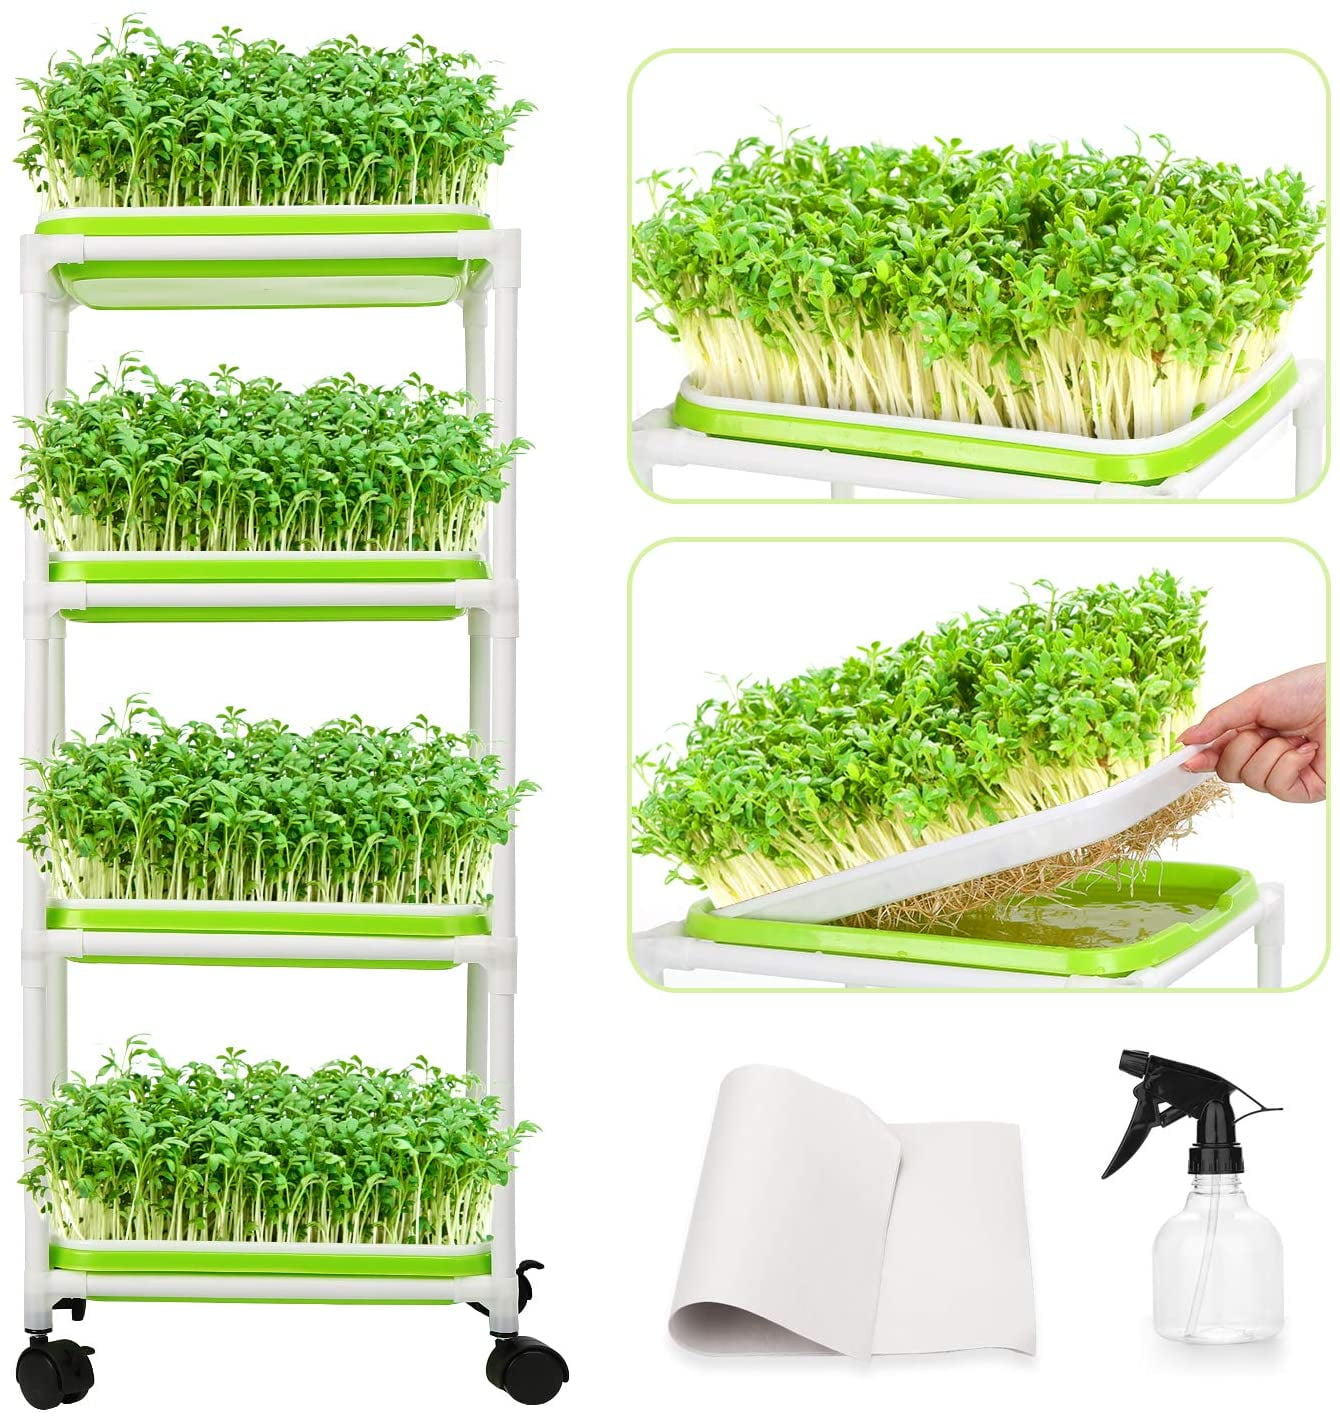 5 MAOPINER Seed Sprouter Tray with Drain Holes BPA Free Nursery Tray Seed Germination Tray Healthy Wheatgrass Seeds Grower & Storage Trays for Garden Home Office with Germinating Paper 